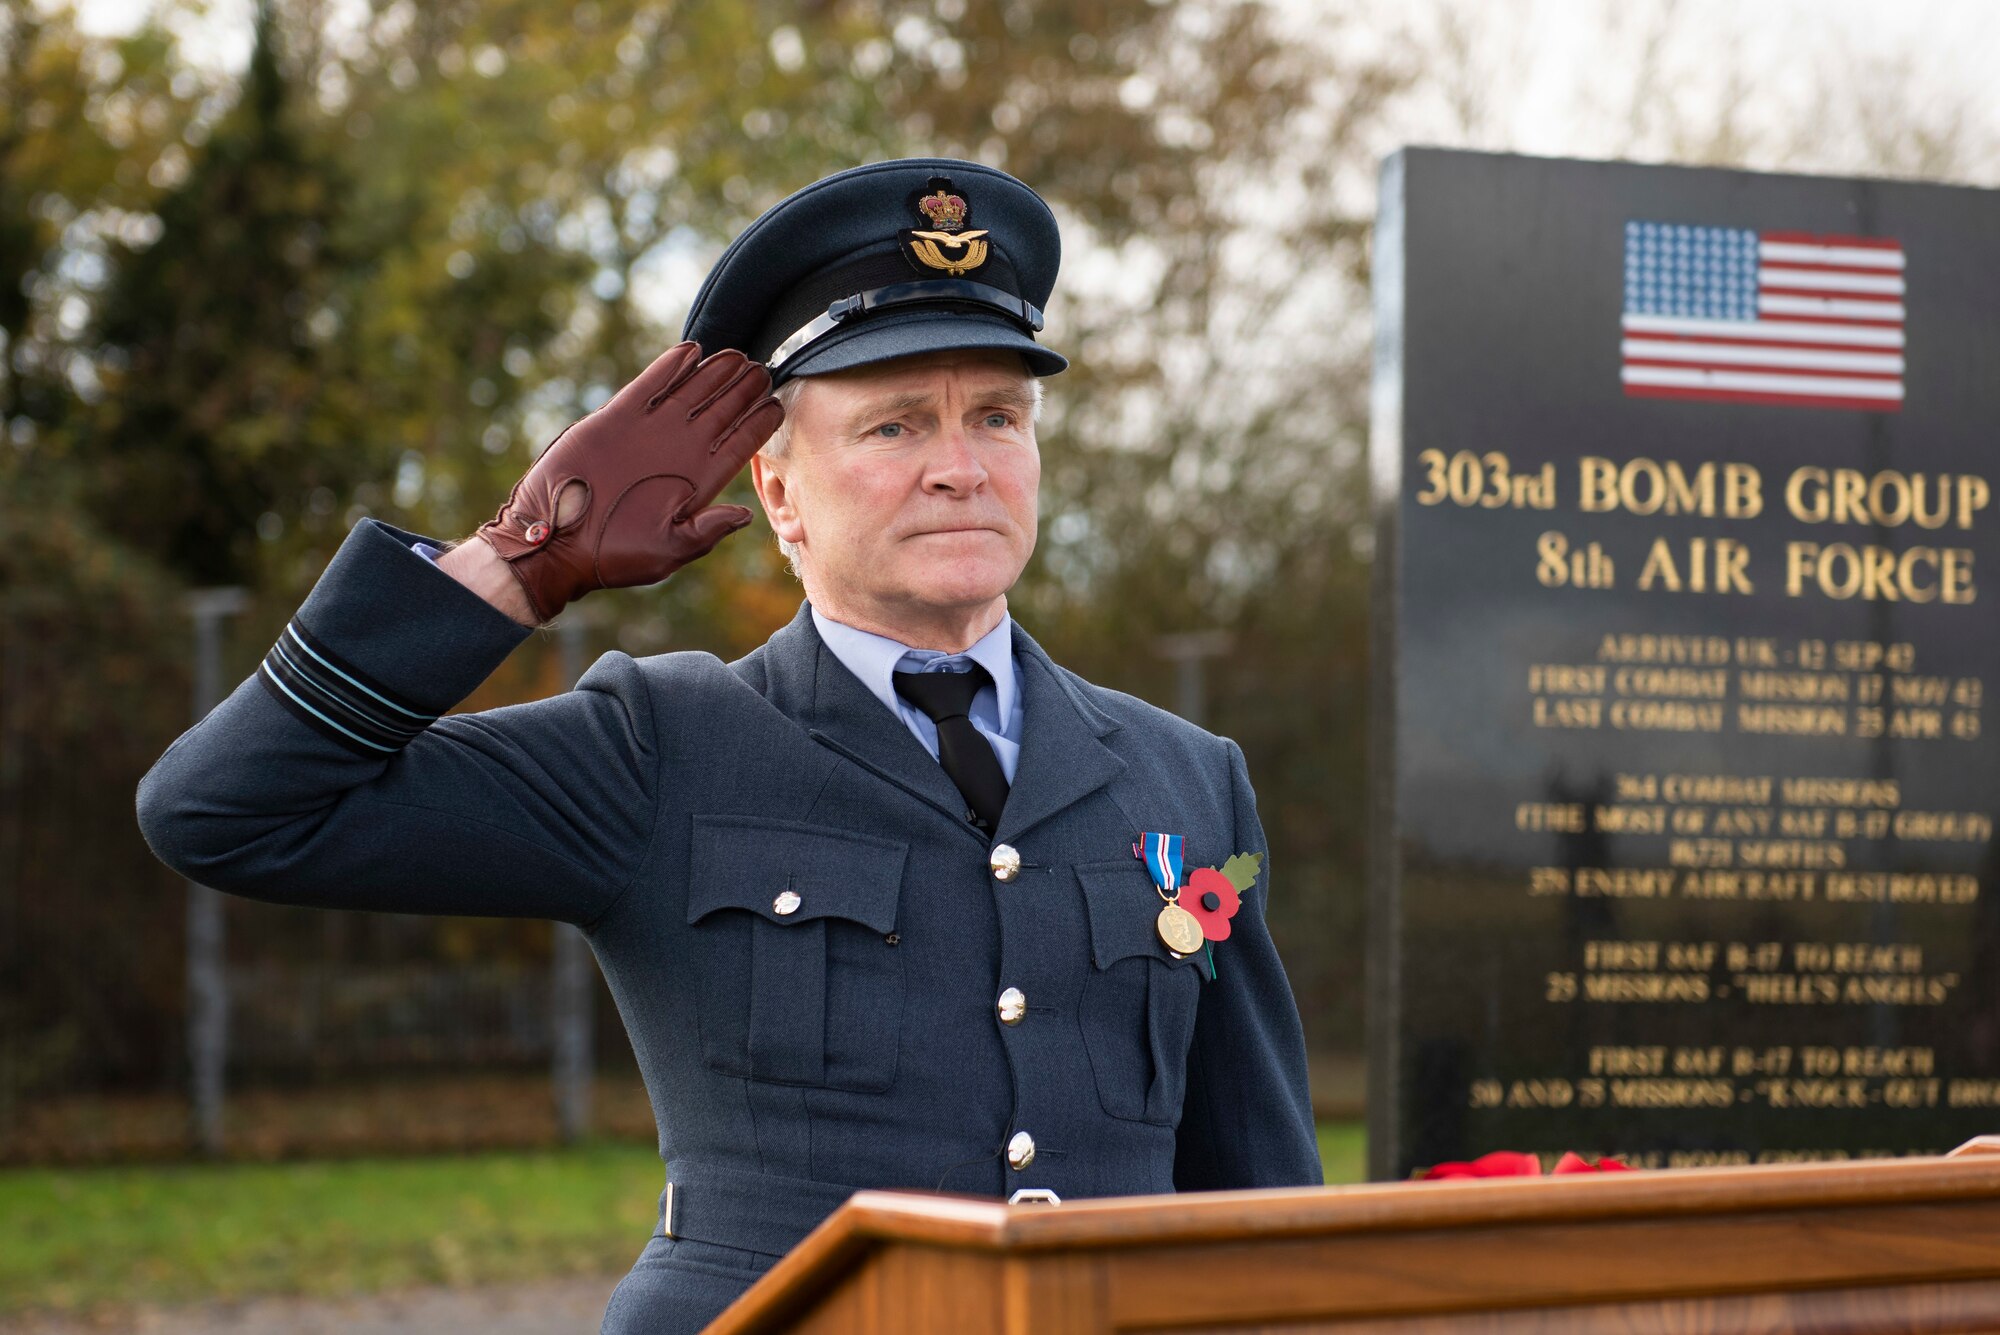 Royal Air Force Sqn. Ldr. Clive Wood, RAF Alconbury and RAF Molesworth RAF commander, salutes during a Remembrance Sunday ceremony near the 303rd Bombardment Group memorial monument at RAF Molesworth, England, Nov. 3, 2020. Remembrance Sunday is commemorated the second Sunday every November to honor the service and sacrifice of Armed Forces, British and Commonwealth veterans, as well as the Allies that fought alongside them in the two World Wars and later conflicts. (U.S. Air Force photo by Senior Airman Jennifer Zima)